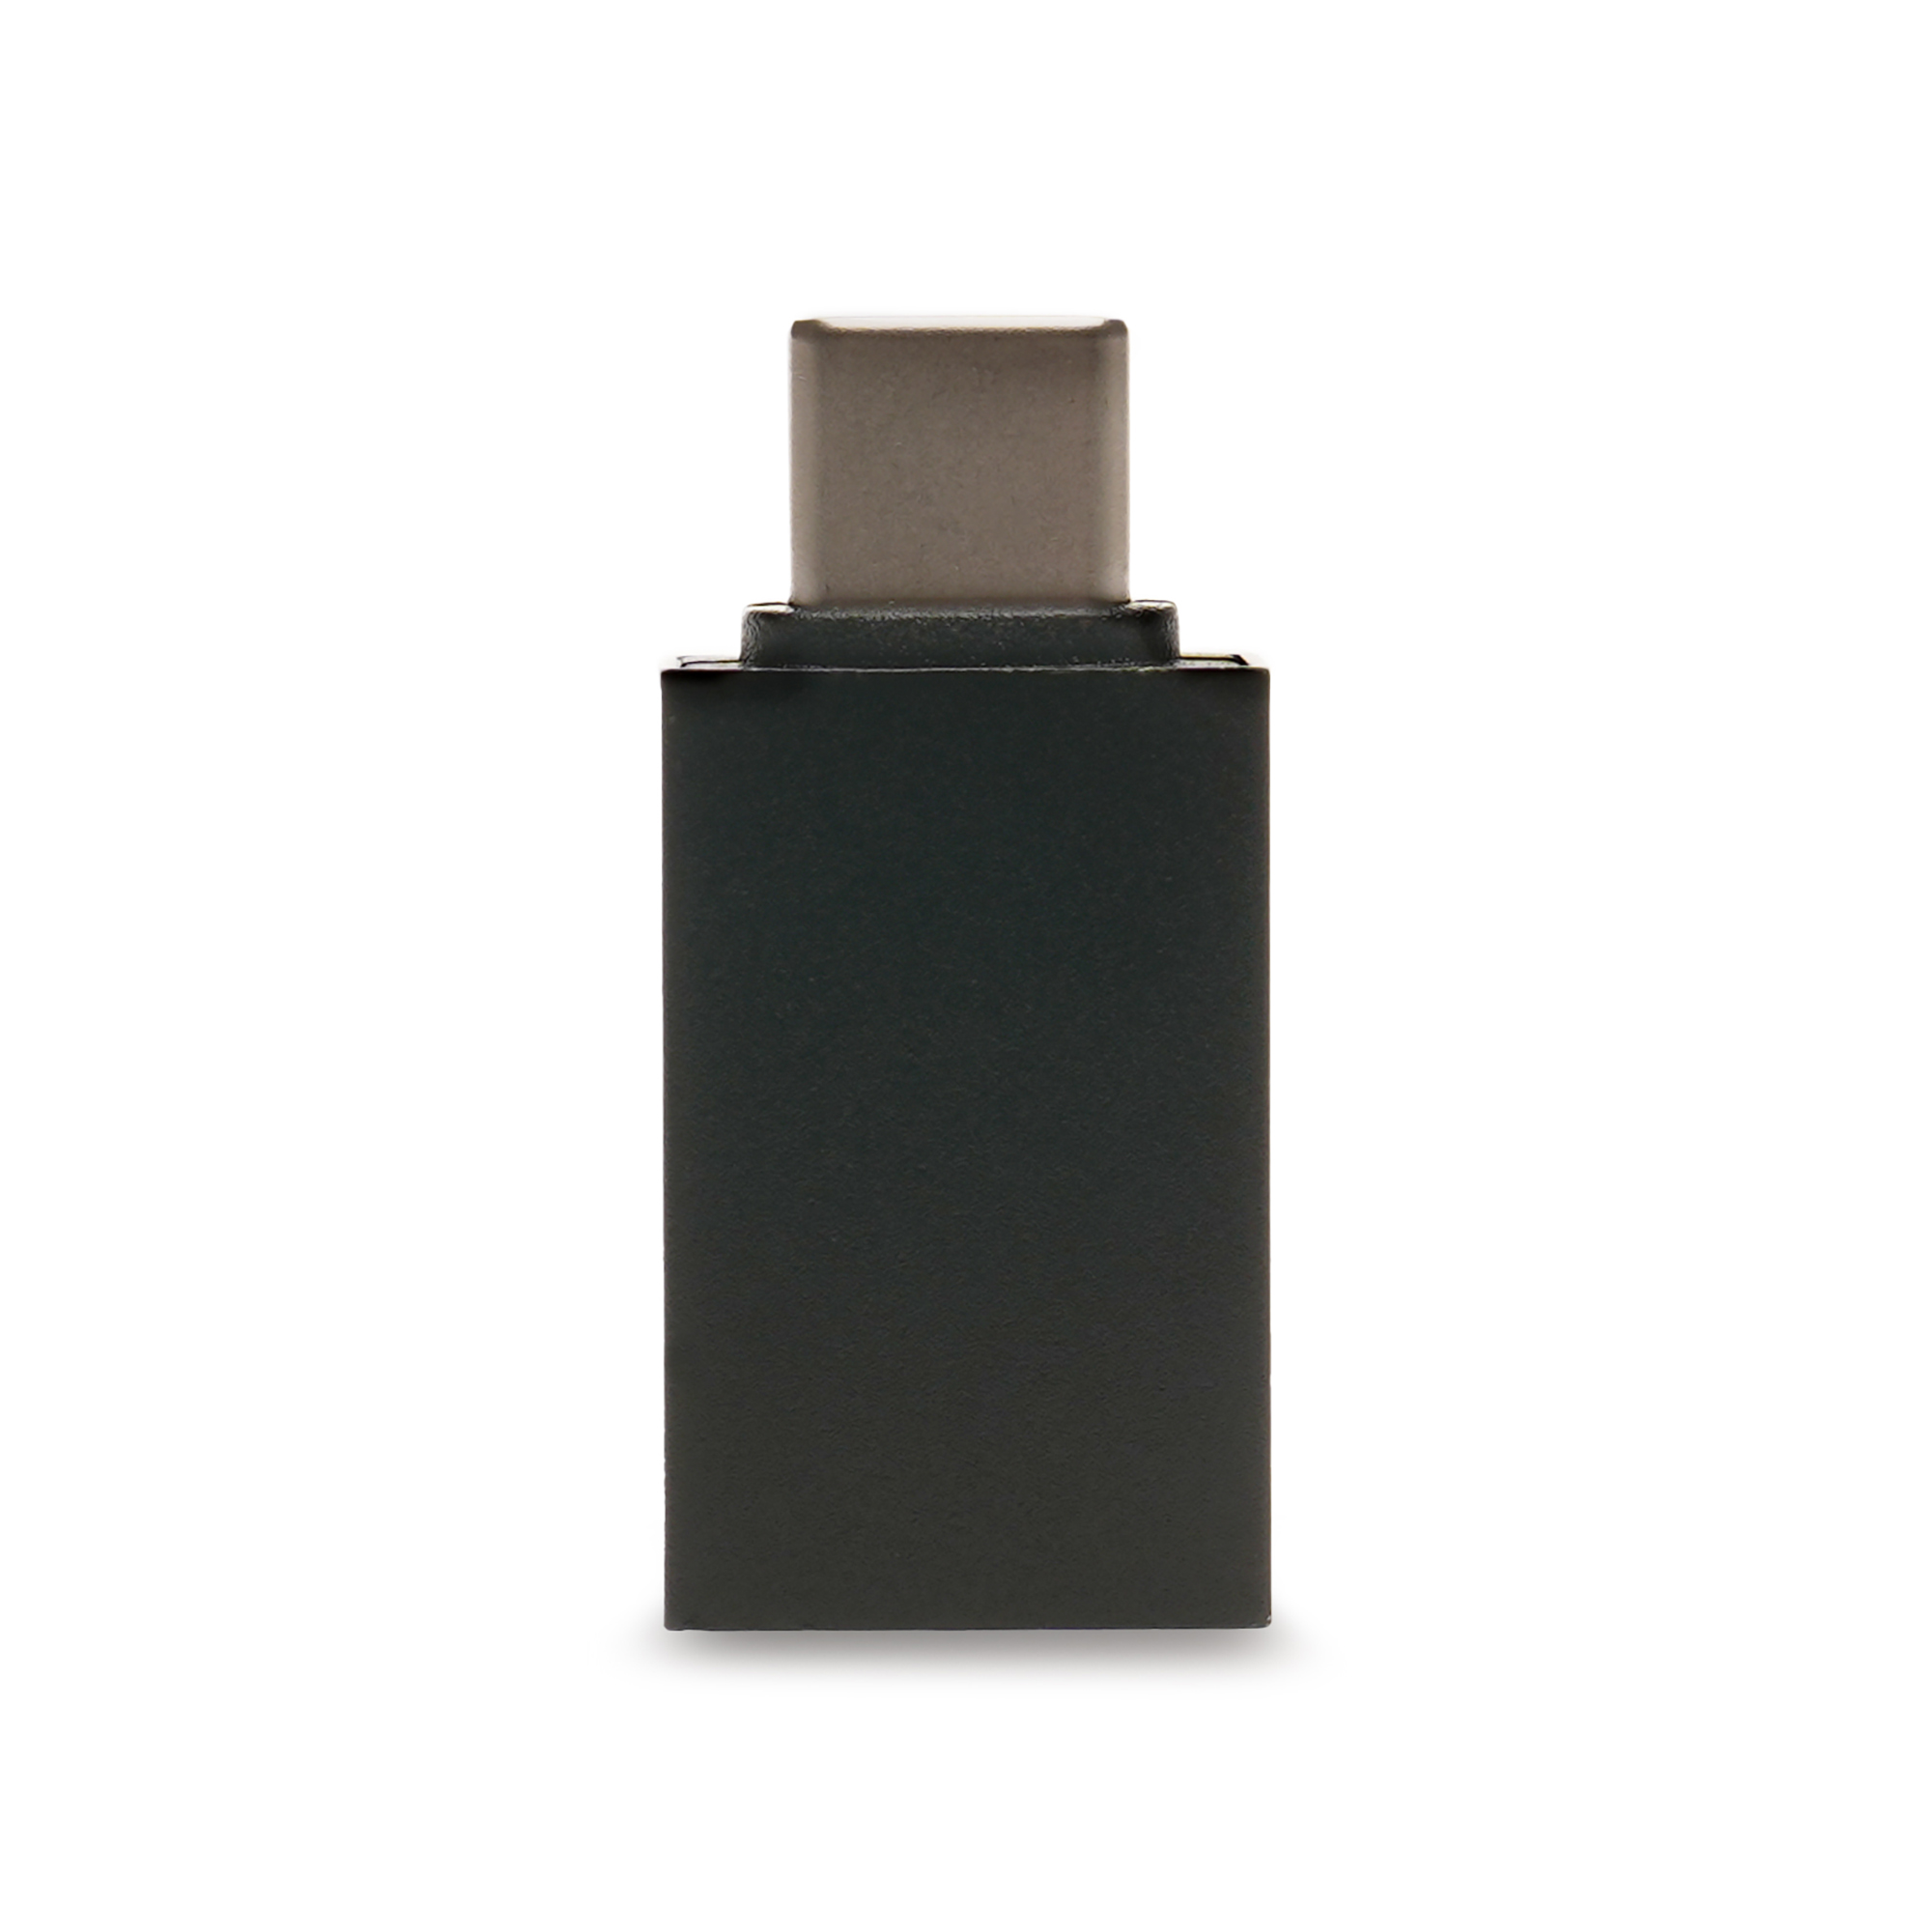 ZP0078 2 - USB-A to Type-C Adapter